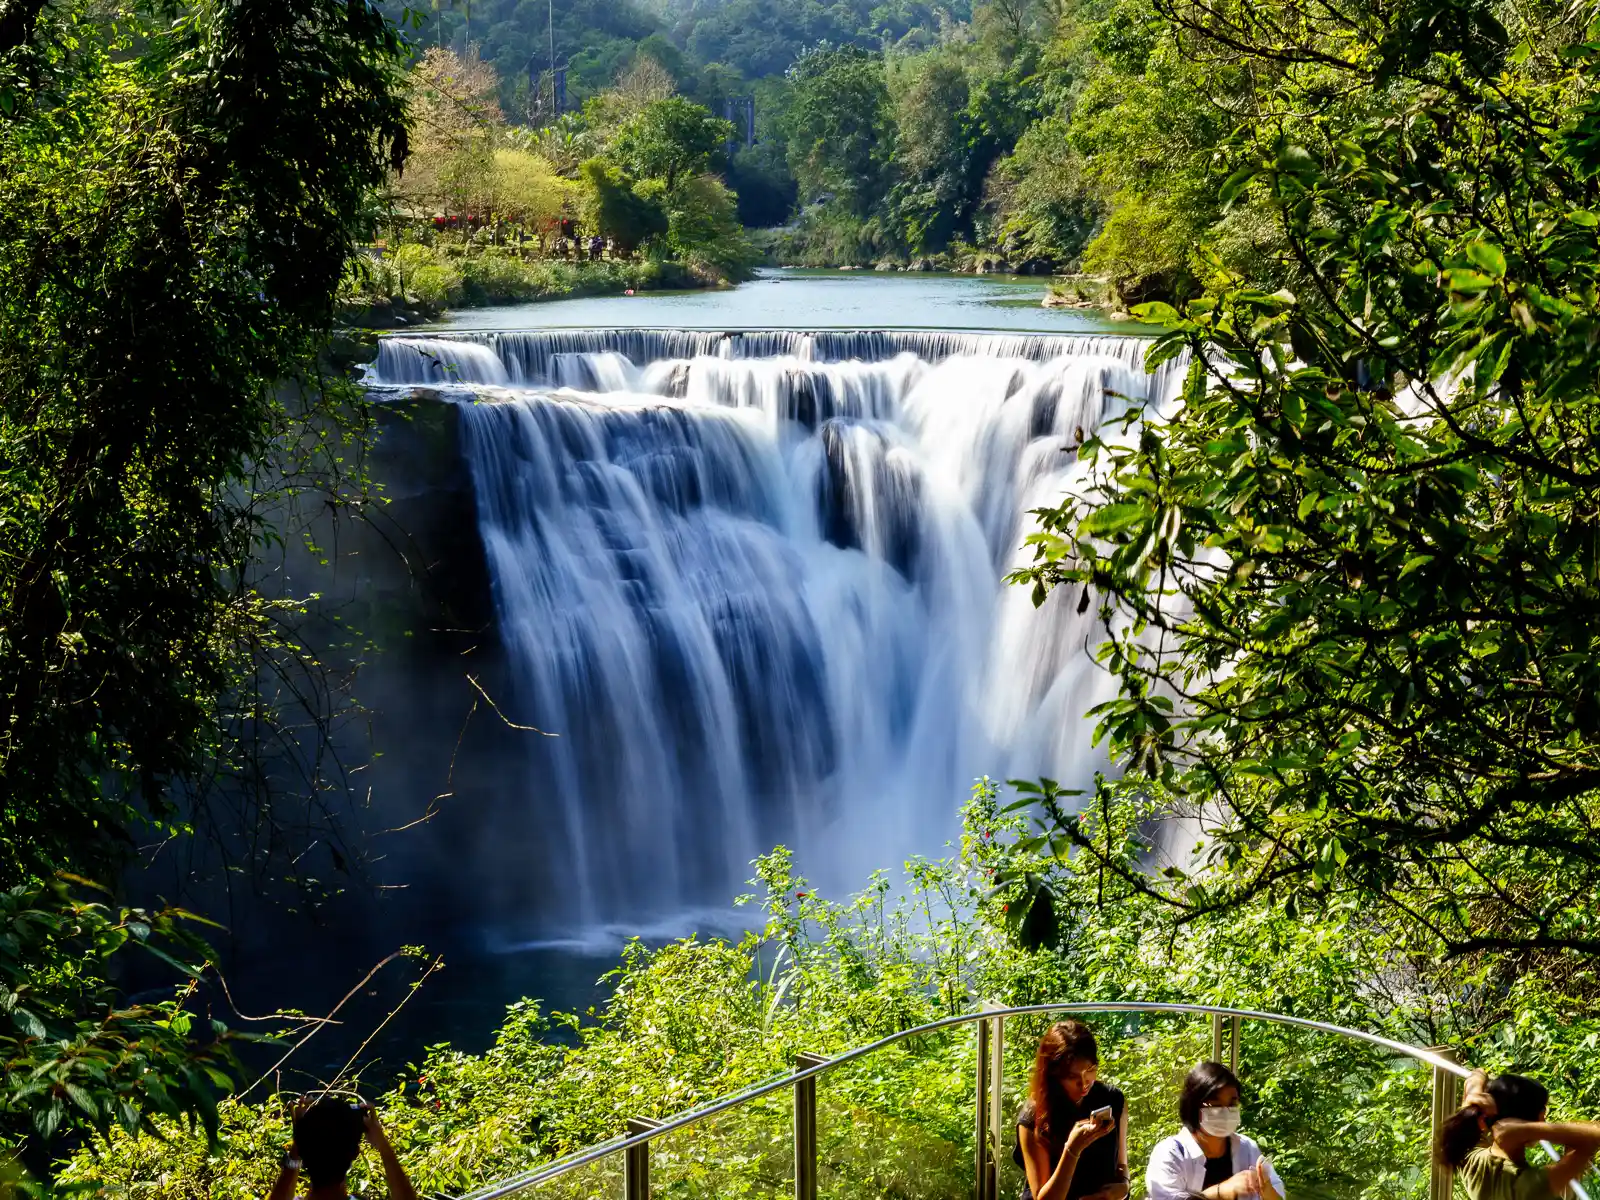 The northern viewing platform faces Shifen Waterfall from downstream.